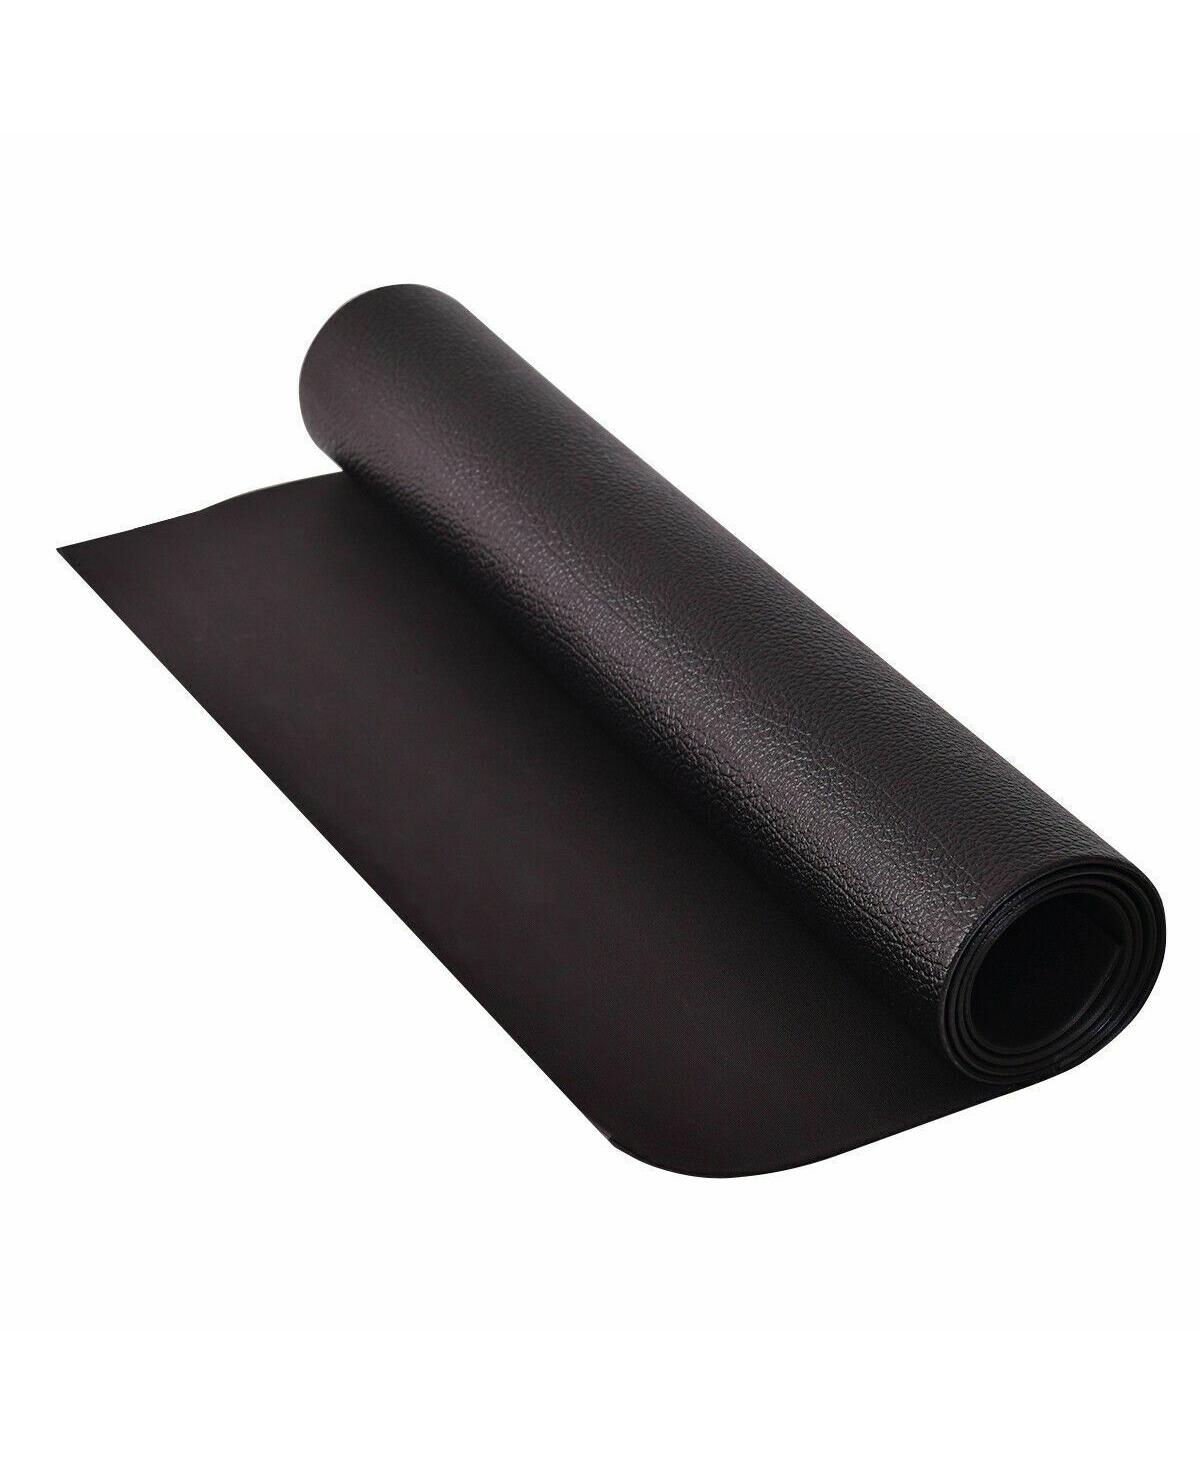 Thicken Equipment Mat for Home and Gym Use-78 x 36 x 0.25 inches - Black